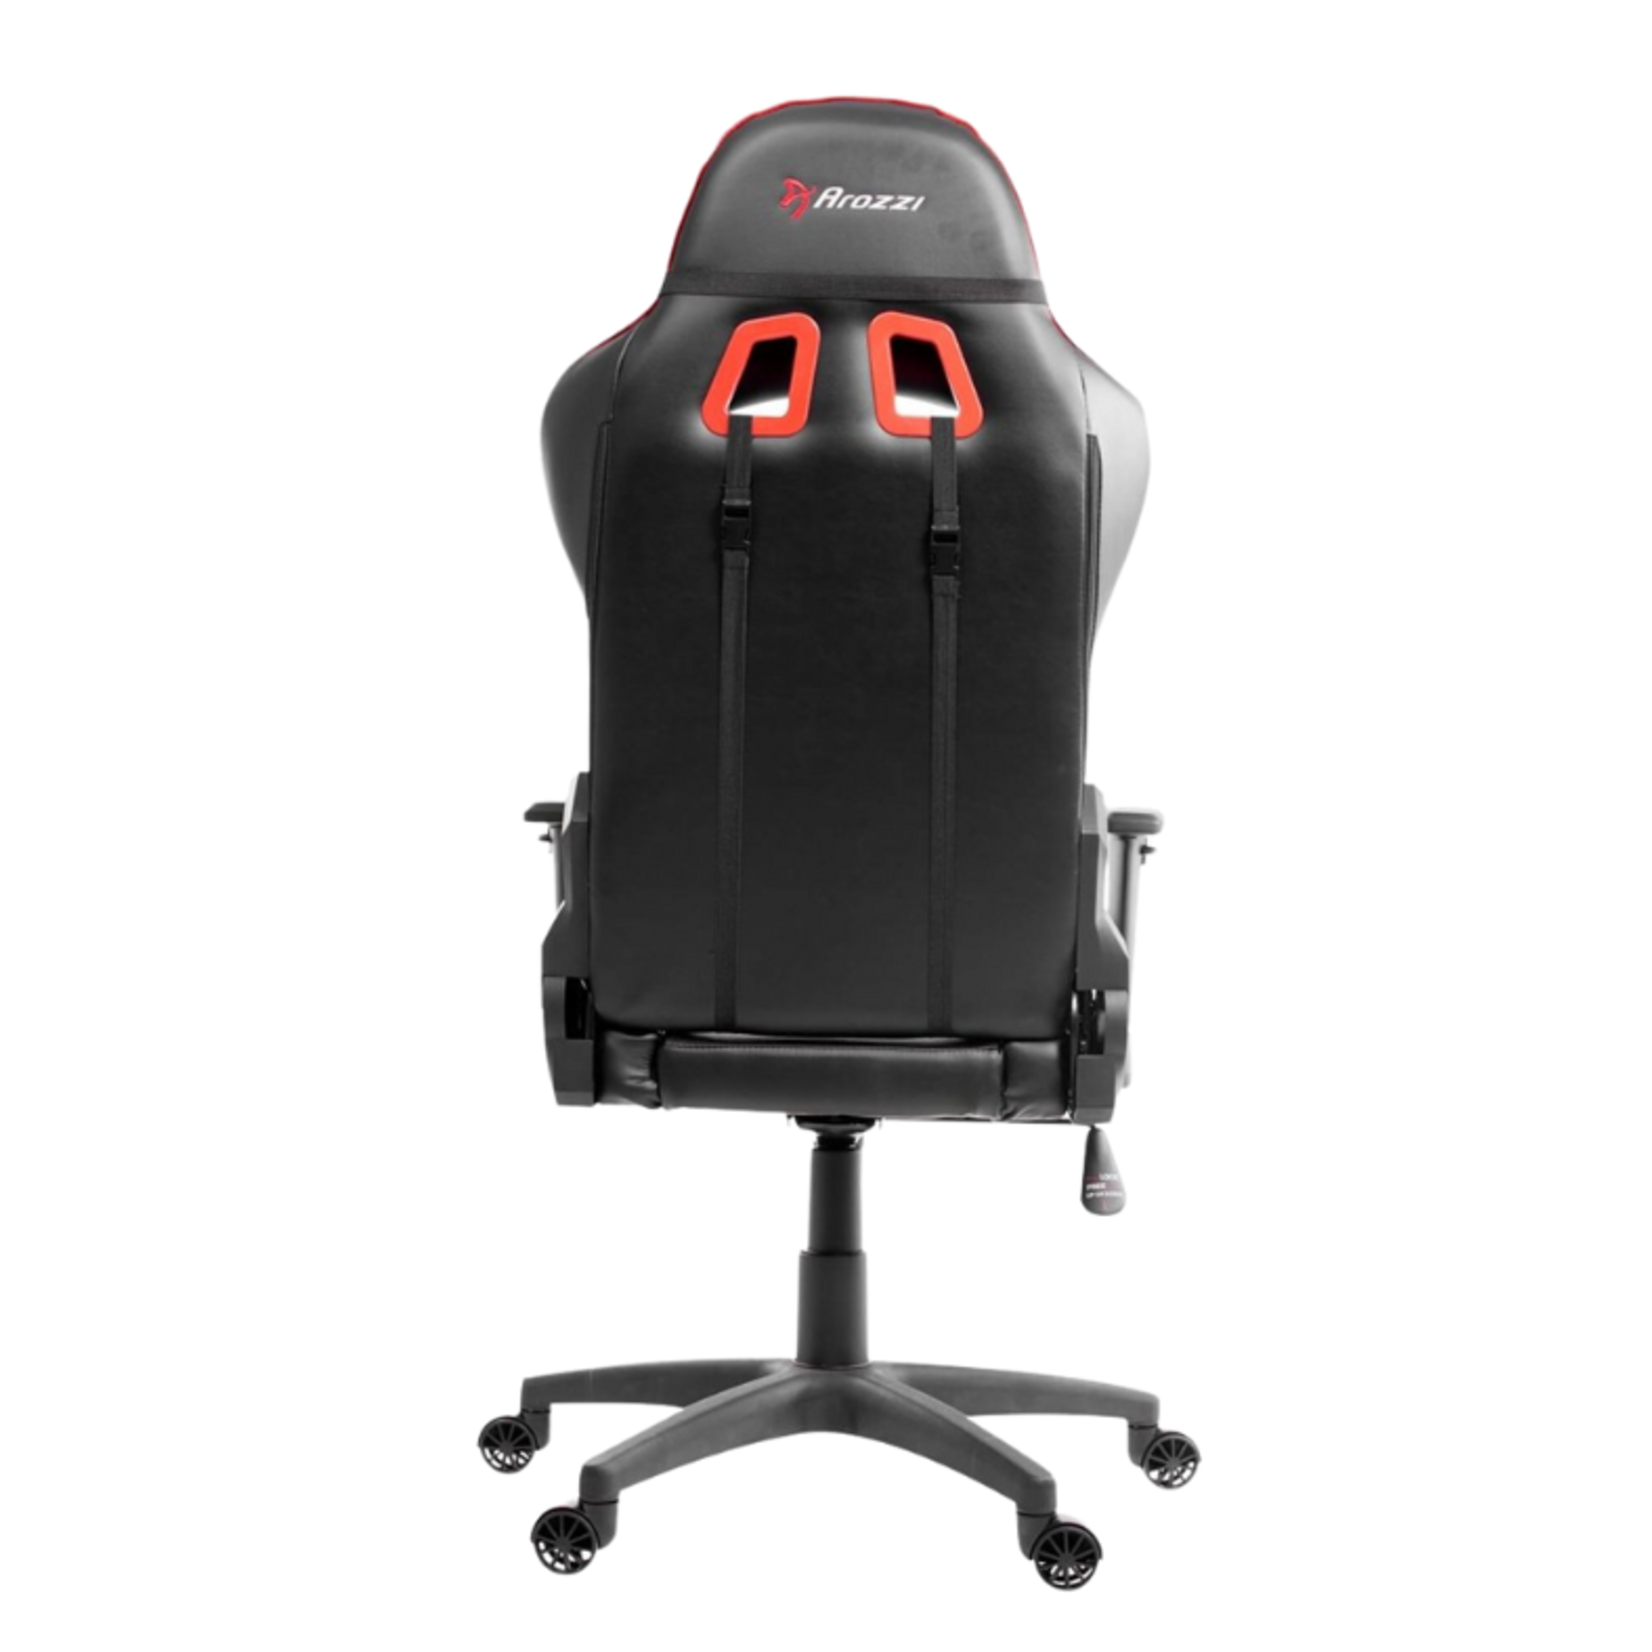 Arozzi Forte Forte Gaming Chair- Black& Red